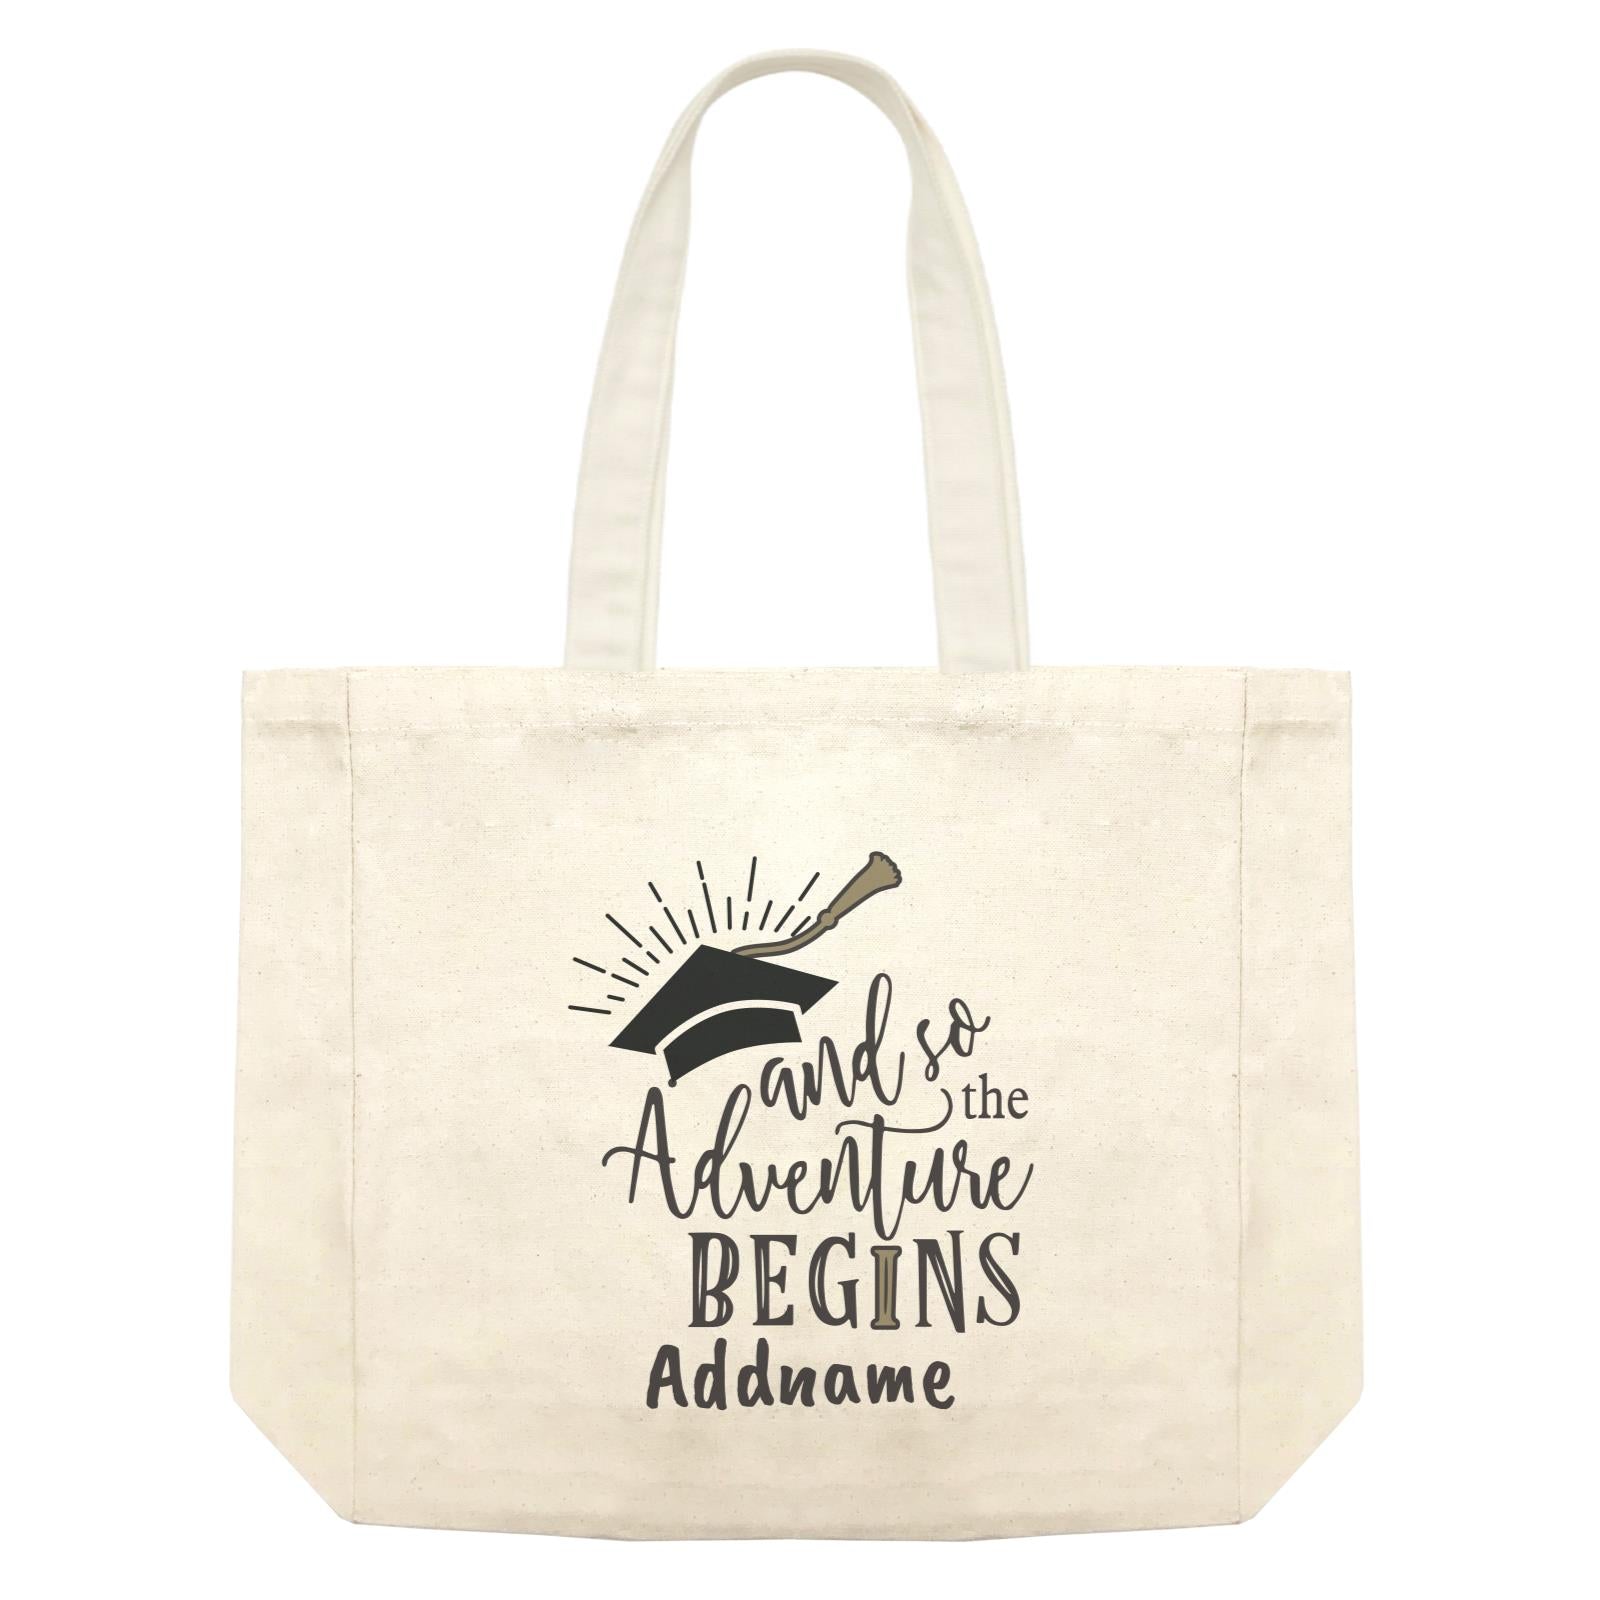 Graduation Series And So The Adventure Begins Shopping Bag